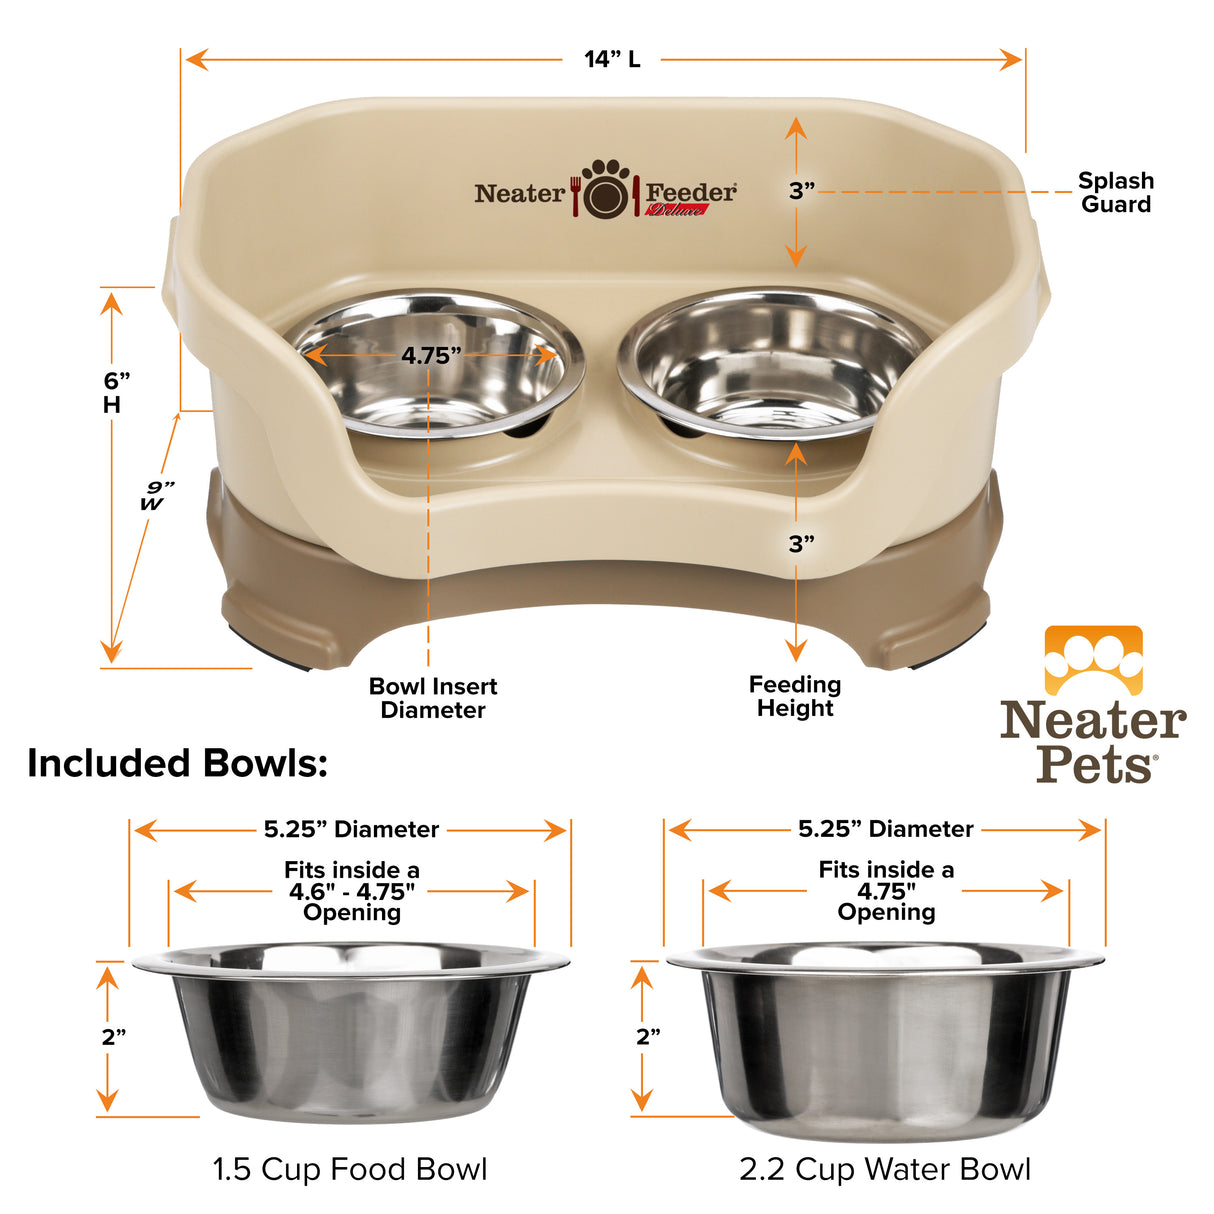 Deluxe Cappuccino Small Dog Neater Feeder and Bowl dimensions